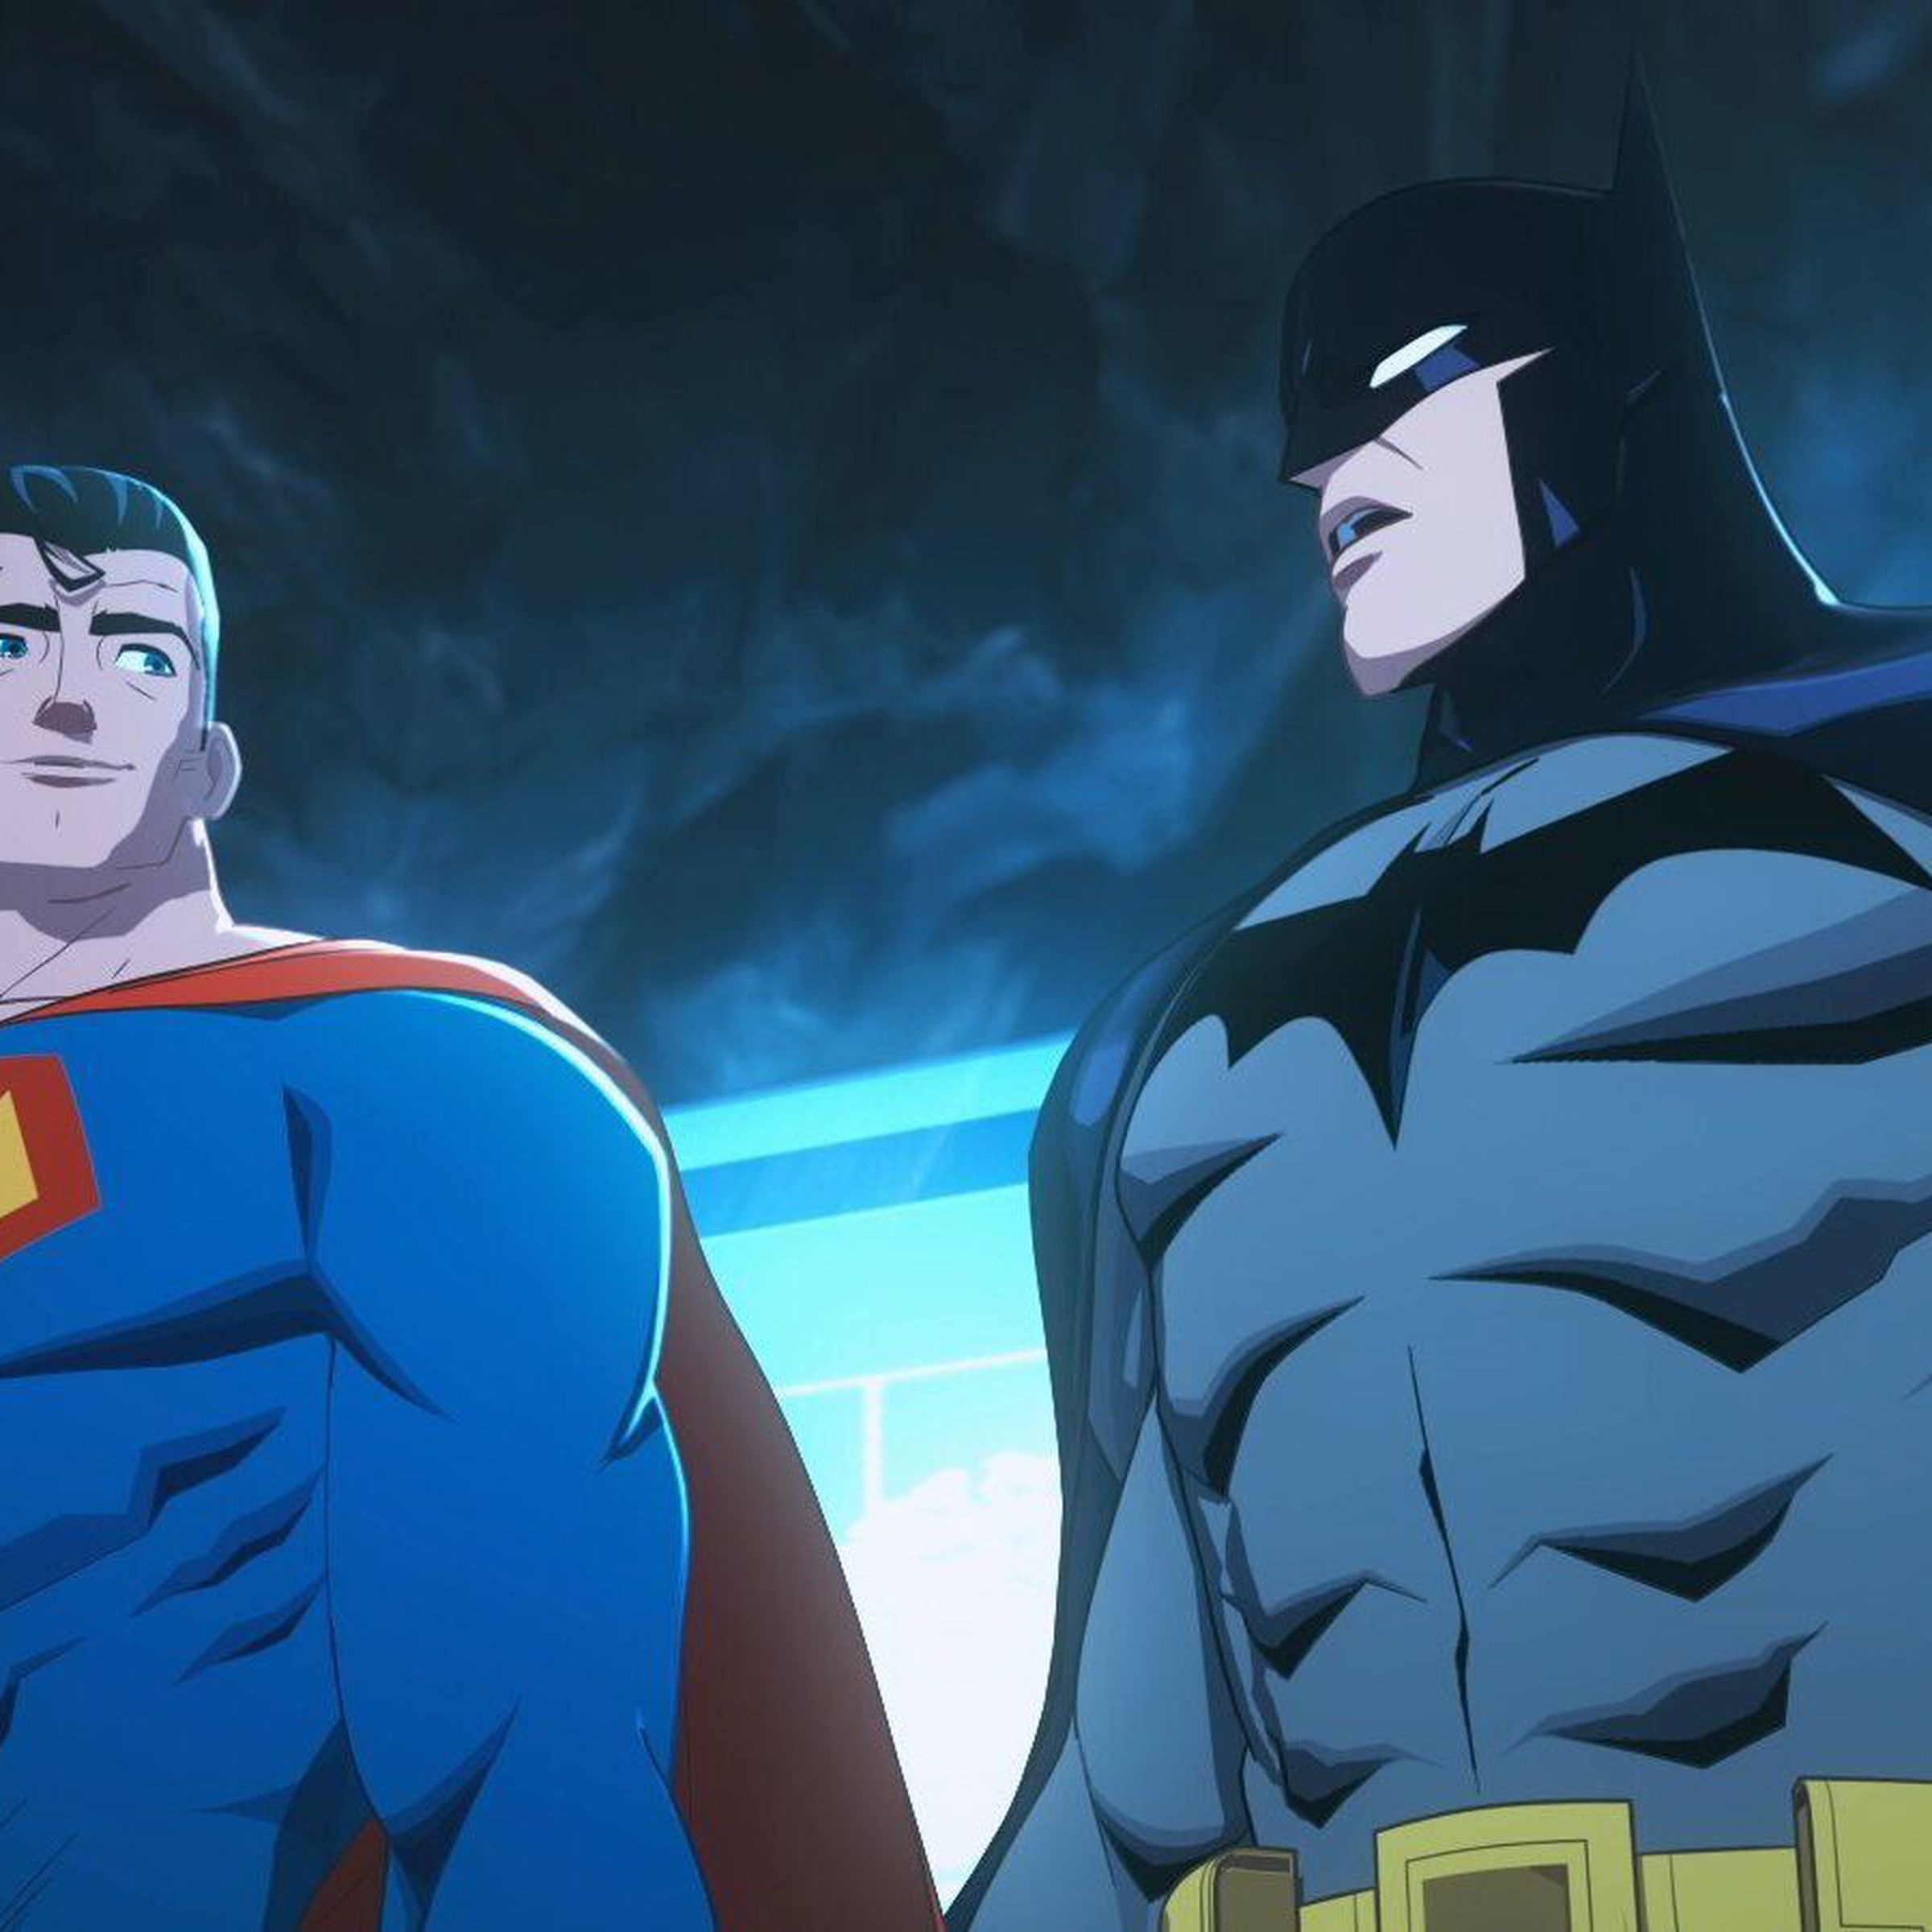 Superman and Batman standing in the Batcave in front of the Batcomputer, which is lighting them both from the back.